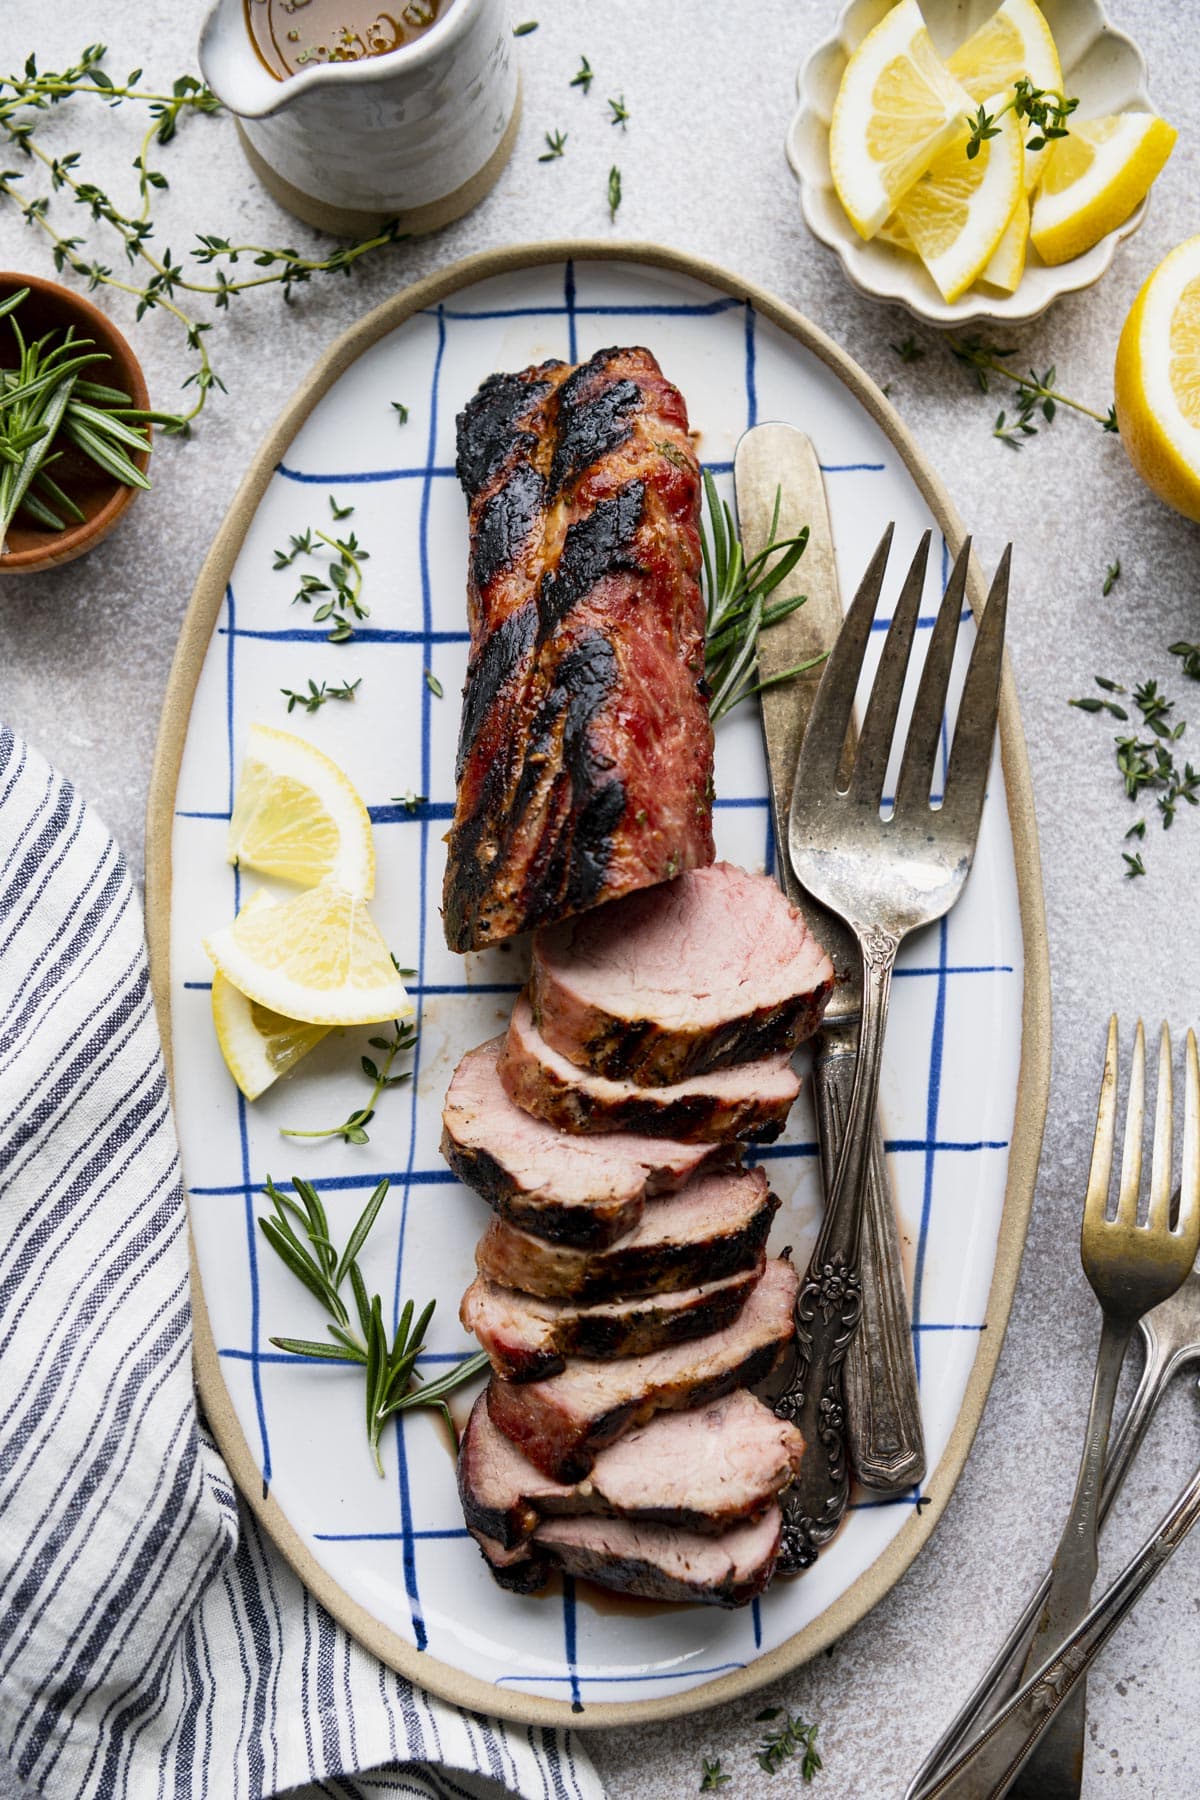 Simple pork tenderloin on a pork tenderloin that's grilled, sliced, and served on a white table.